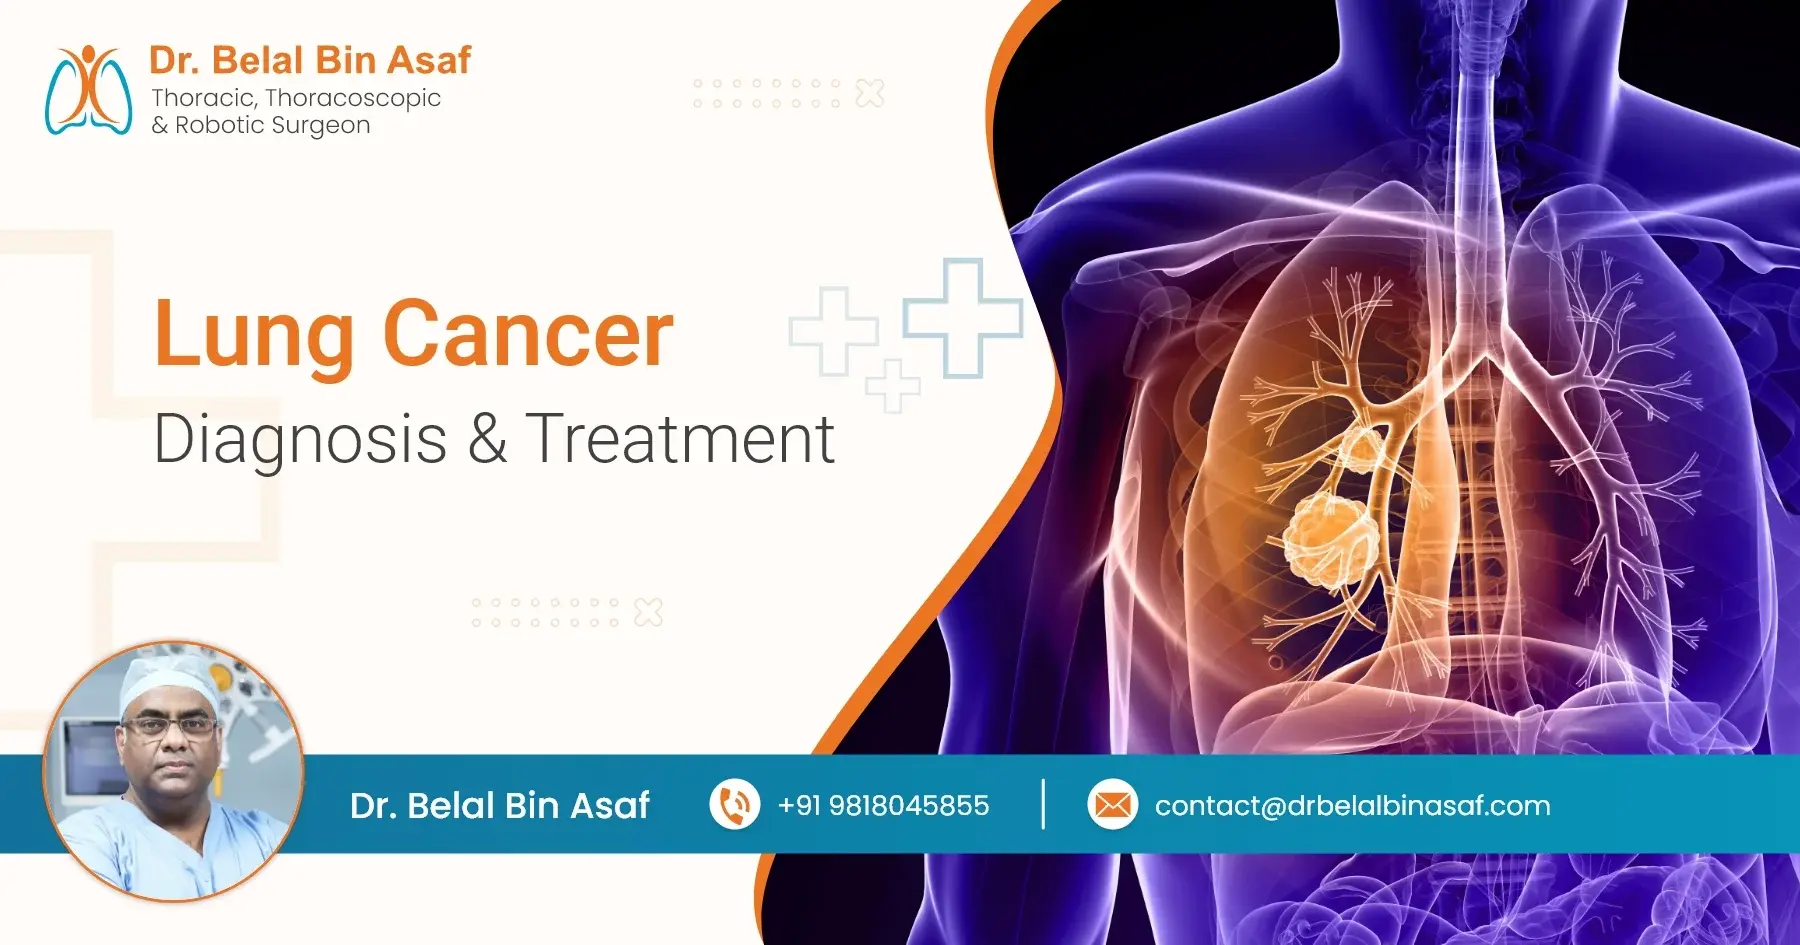 How is Lung Cancer Diagnosed & Treated?